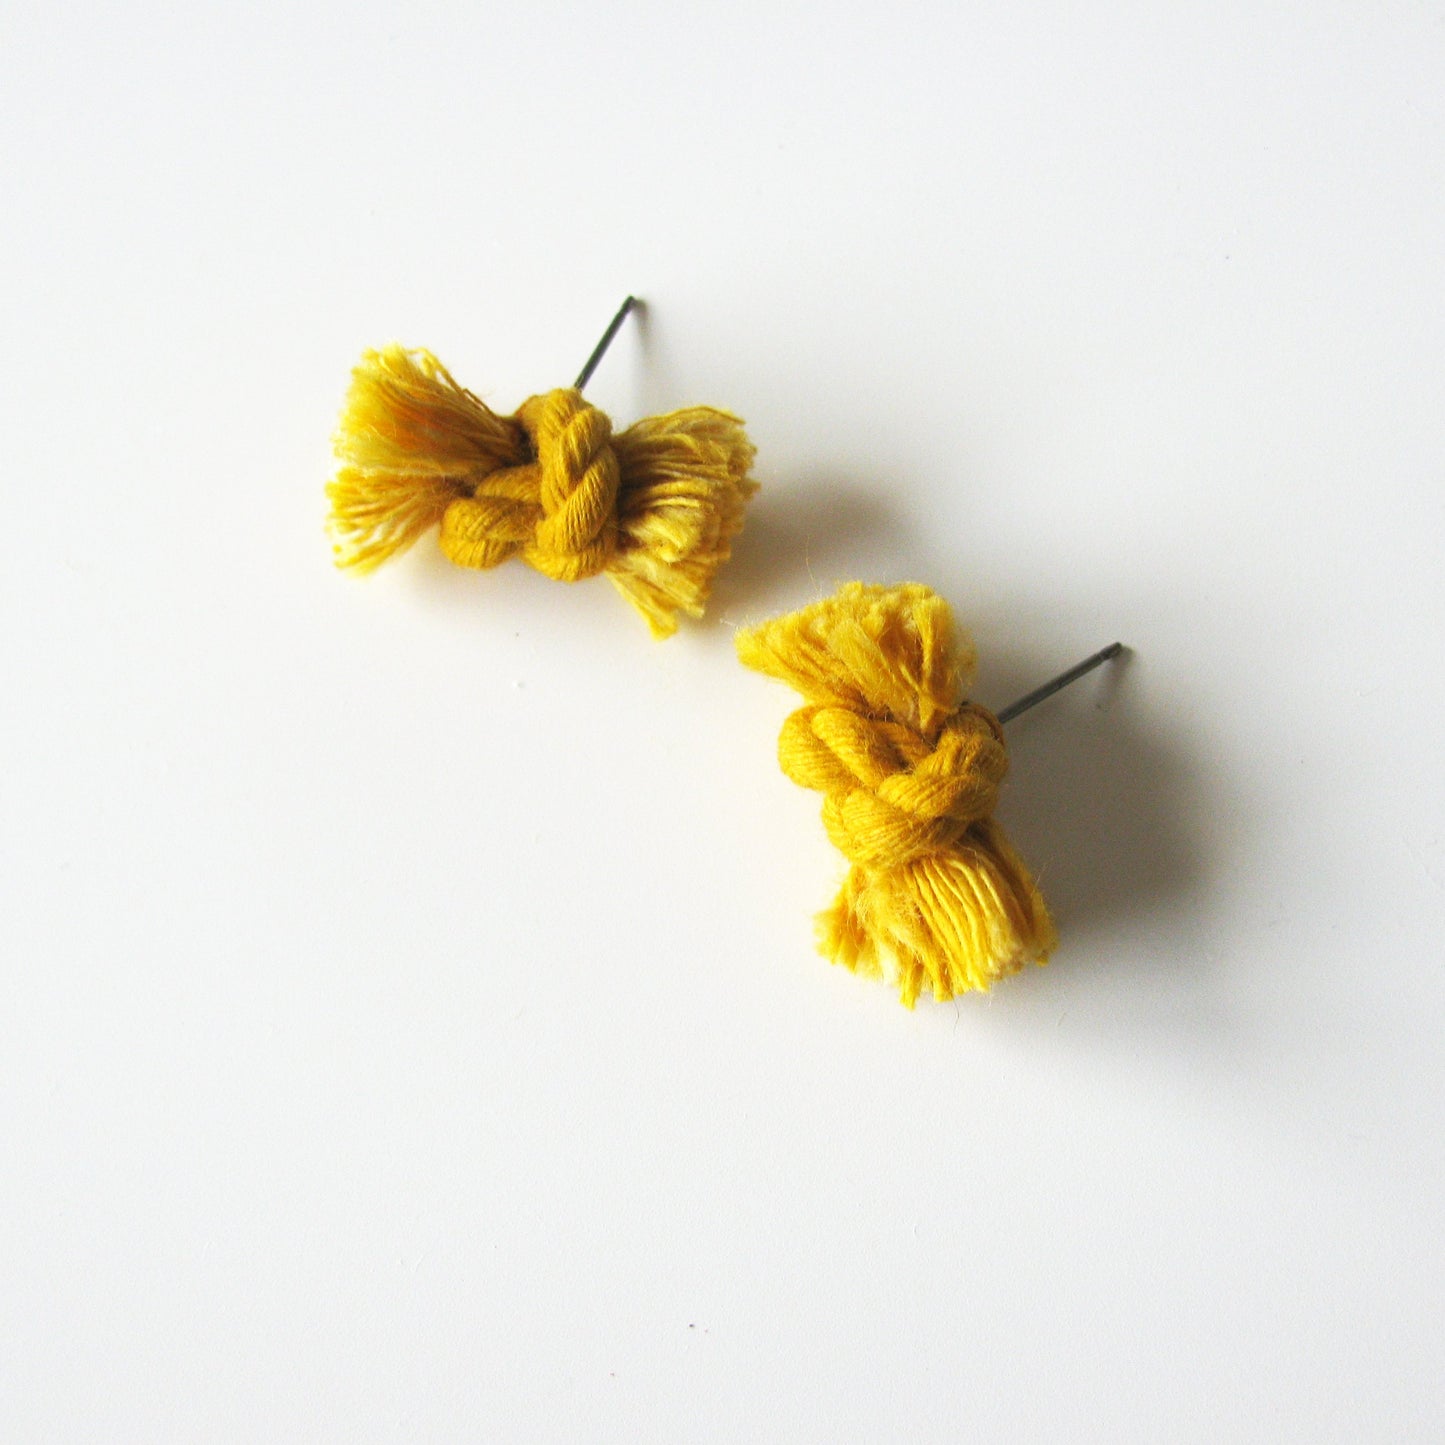 Dyed cotton rope knot earrings with titanium post in marigold.